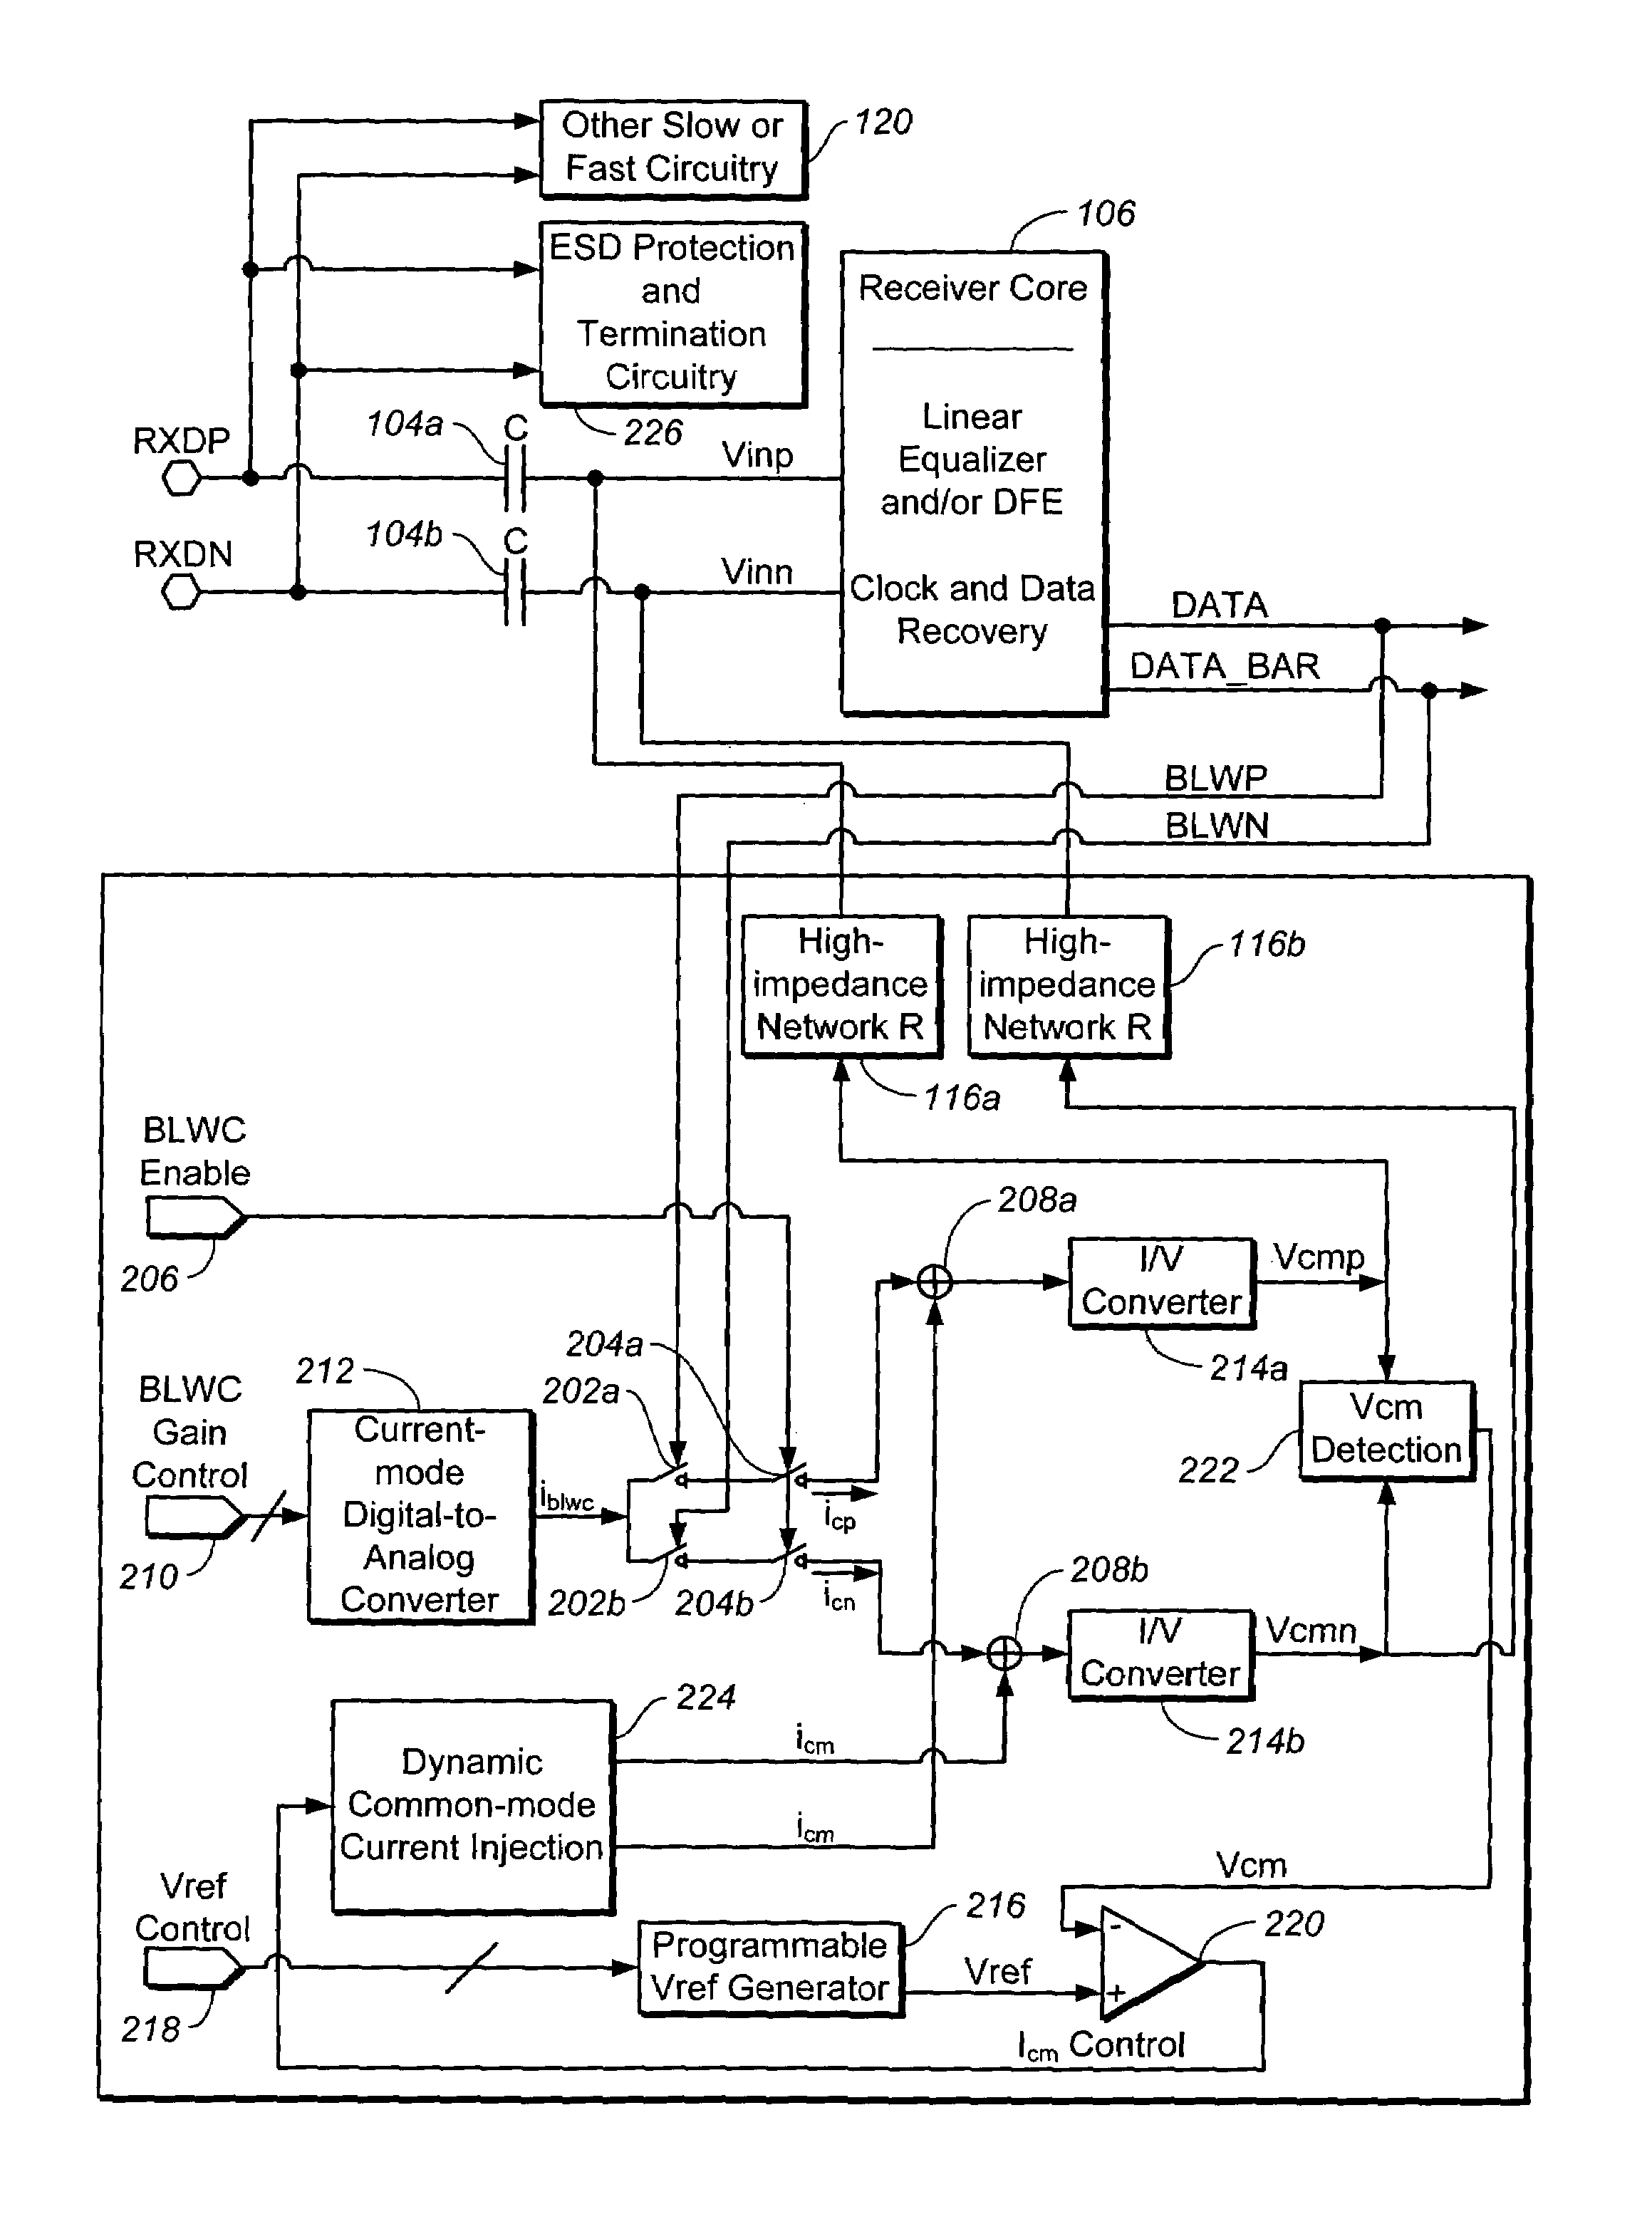 AC coupling circuit integrated with receiver with hybrid stable common-mode voltage generation and baseline wander compensation